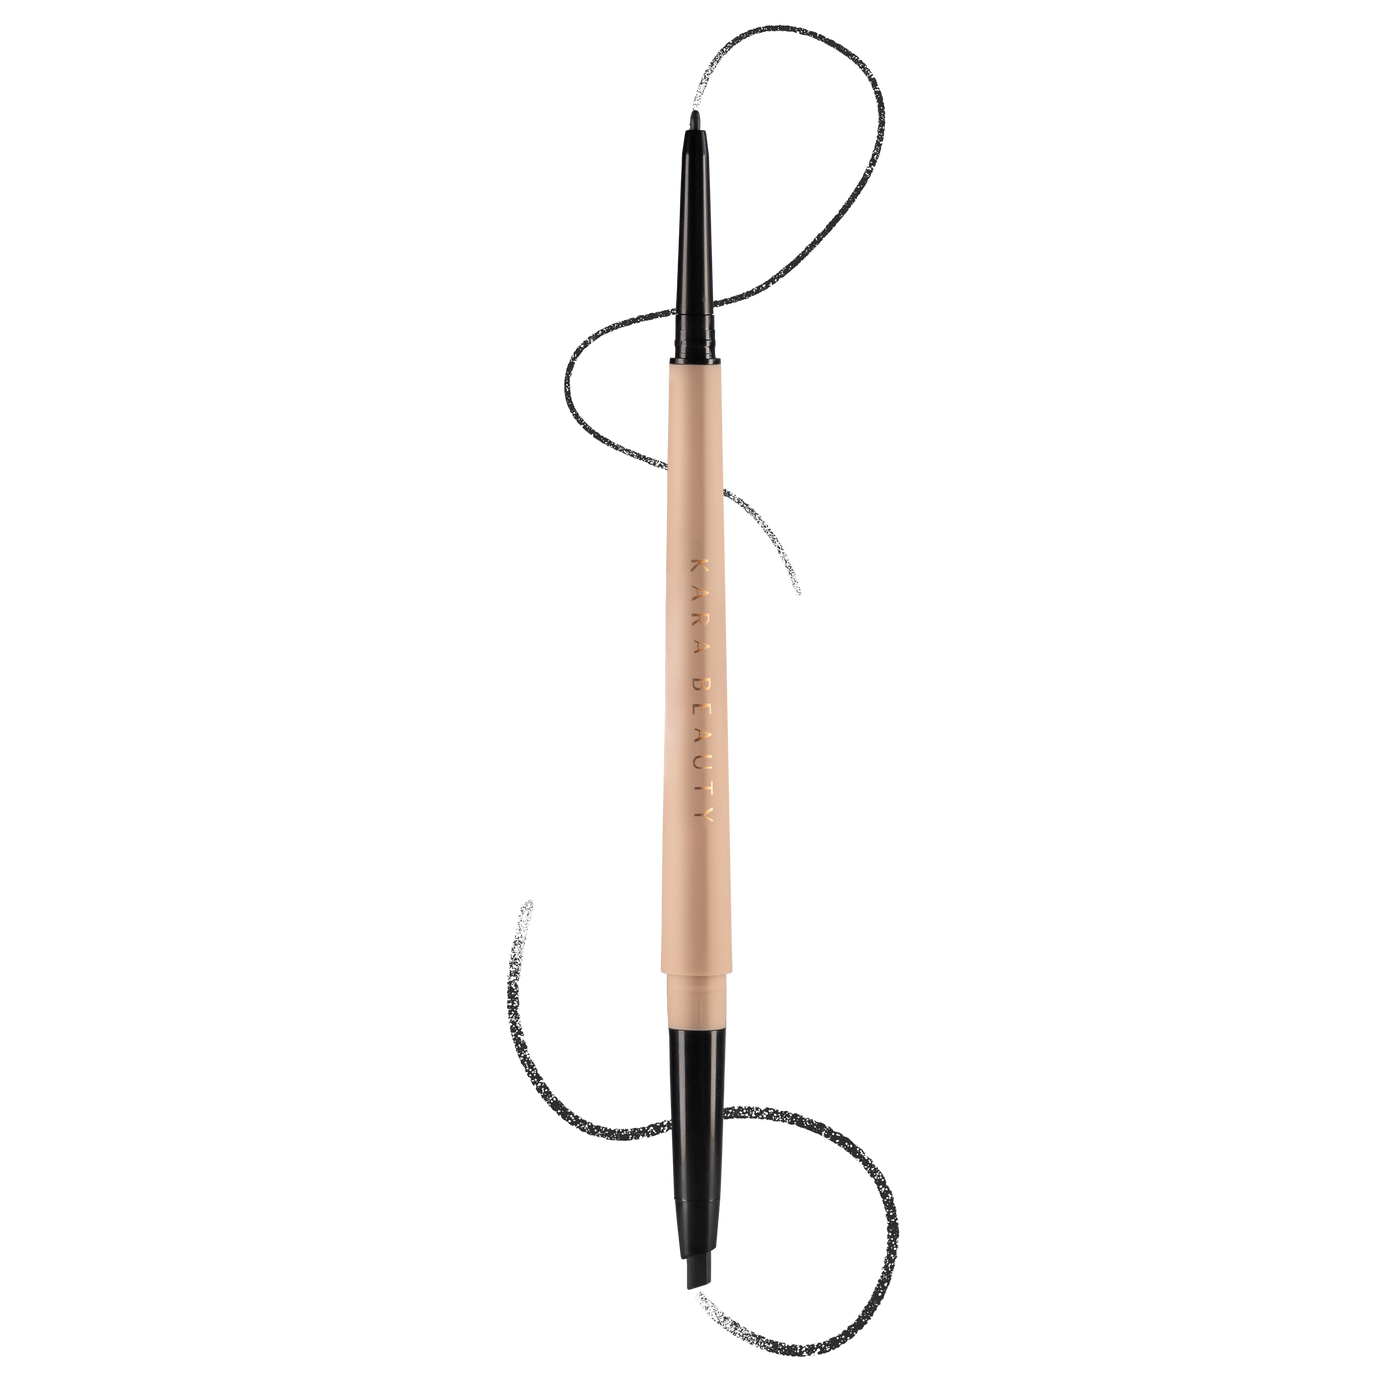 DOUBLE-ENDED Brow Pencil